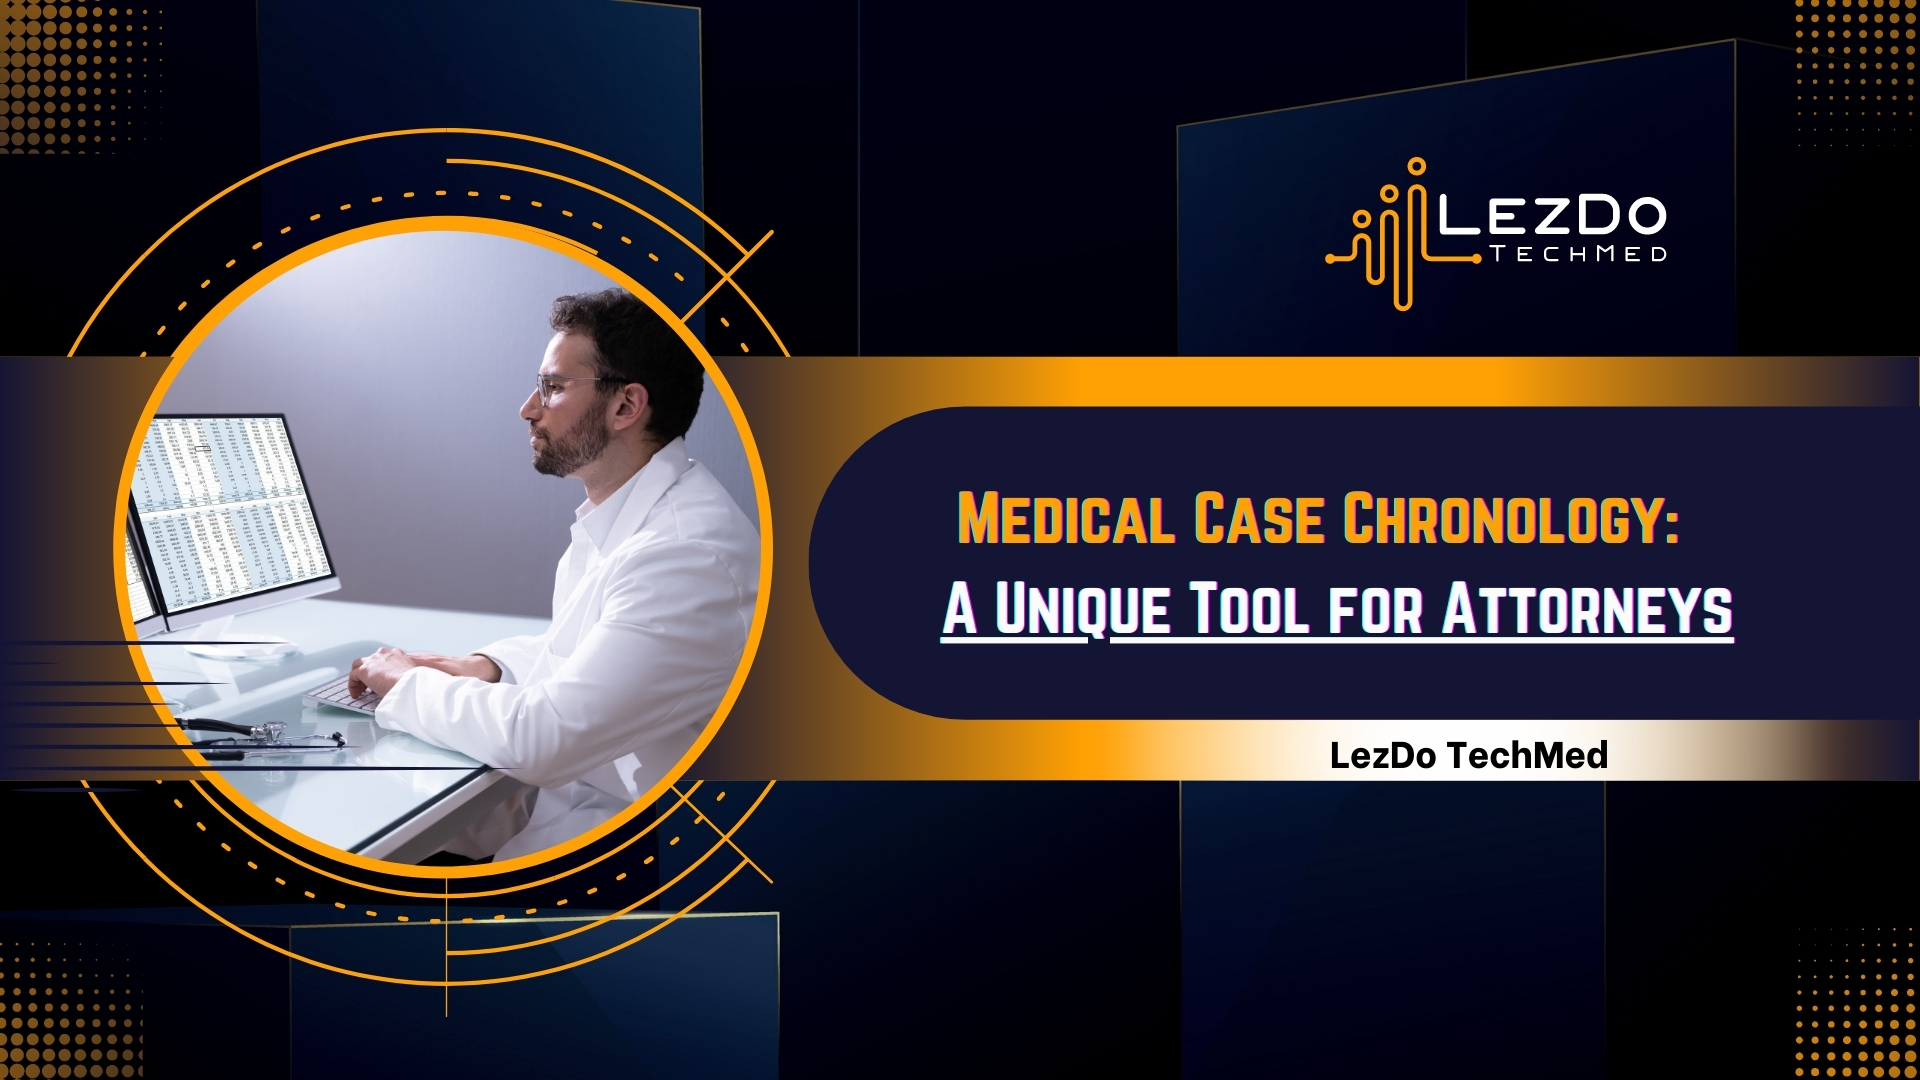 Medical Case Chronology: A Unique Tool for Attorneys